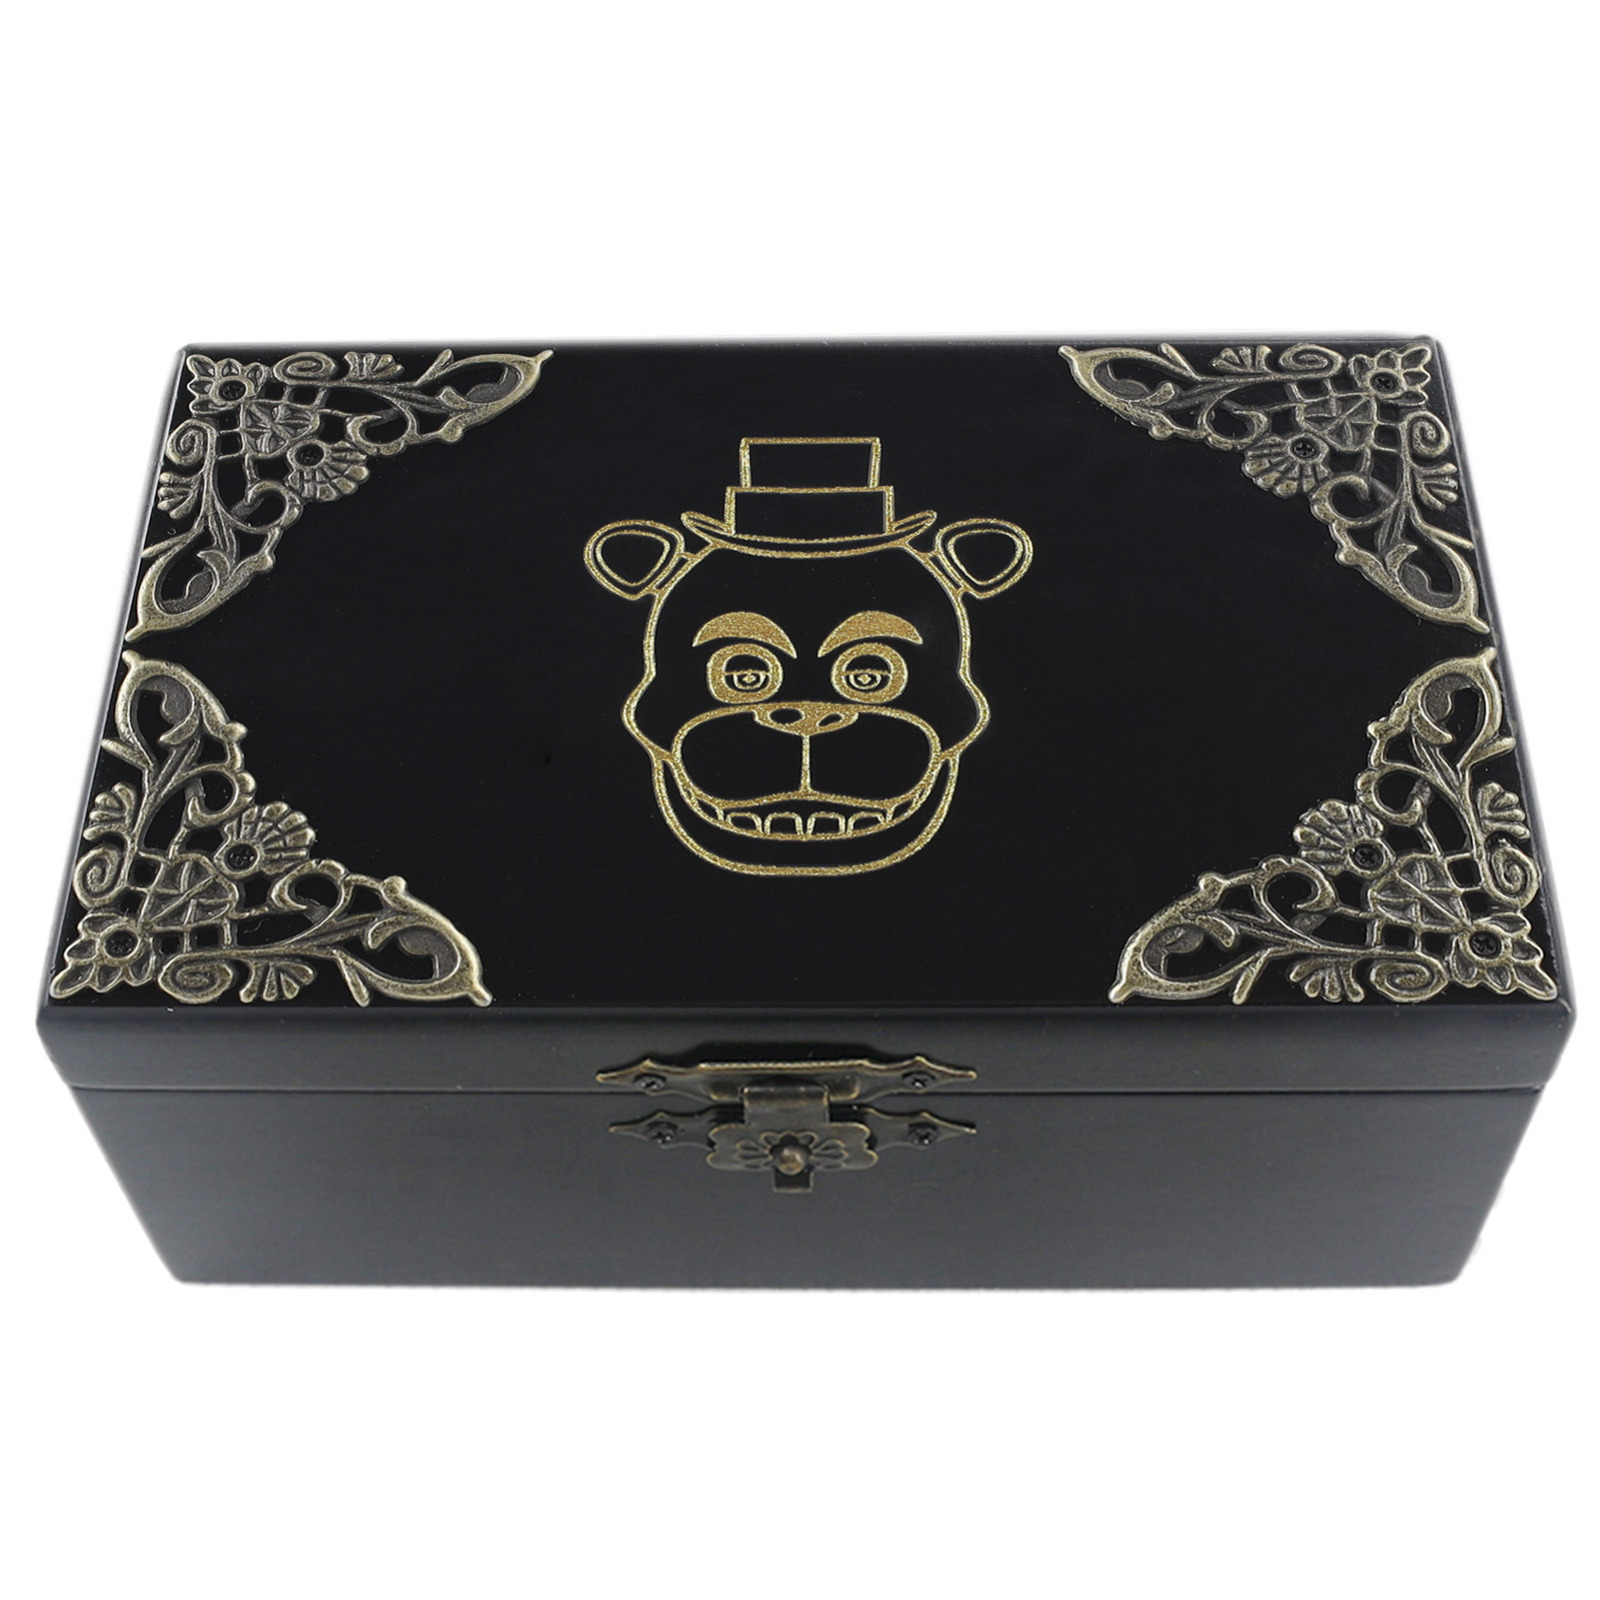 VINTAGE COVER RECTANGLE WIND UP MUSIC BOX  : FIVE NIGHTS AT FREDDY'S